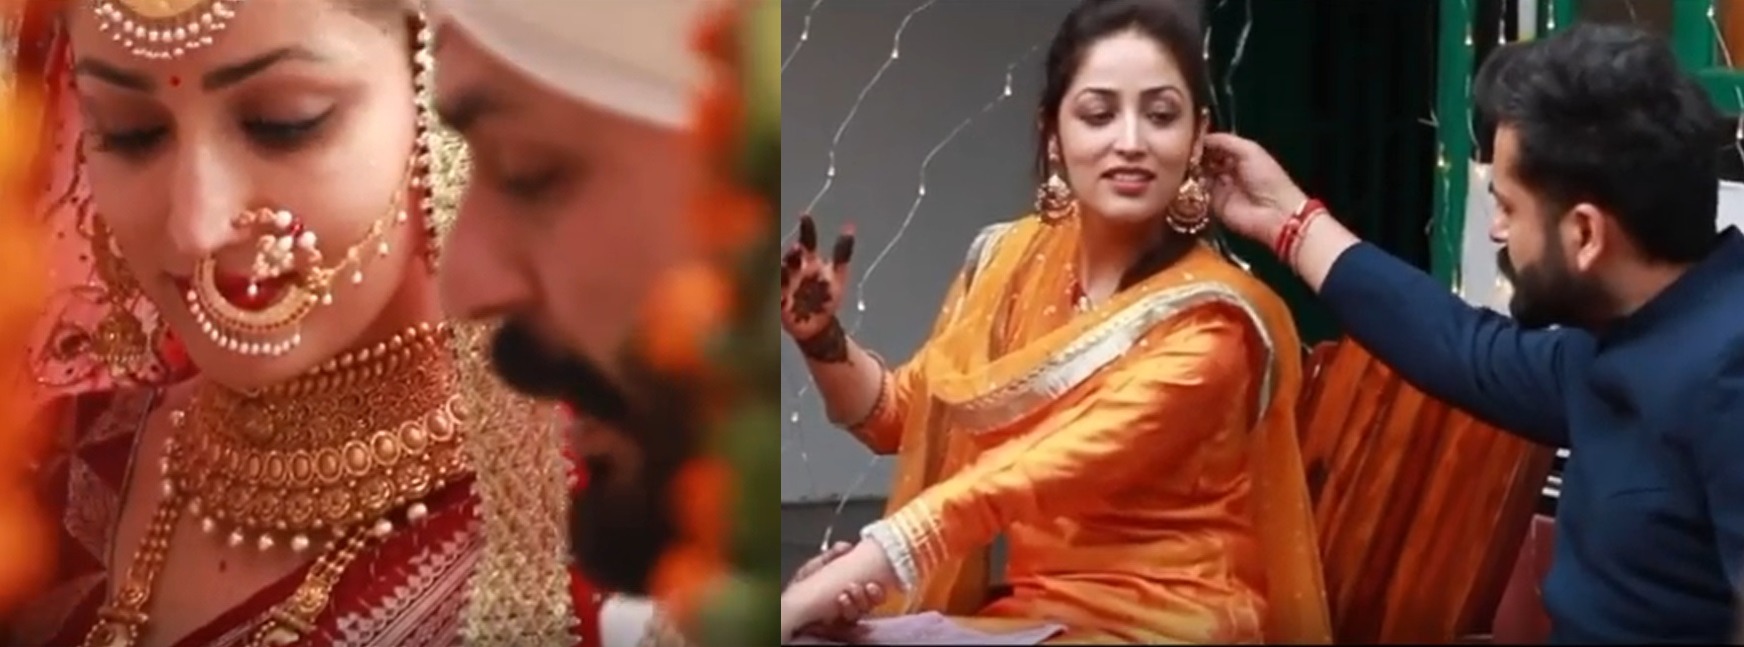 On one year of Yami Gautam and Aditya Dhar’s wedding, Yami packs a surprise video with a loving message: Watch